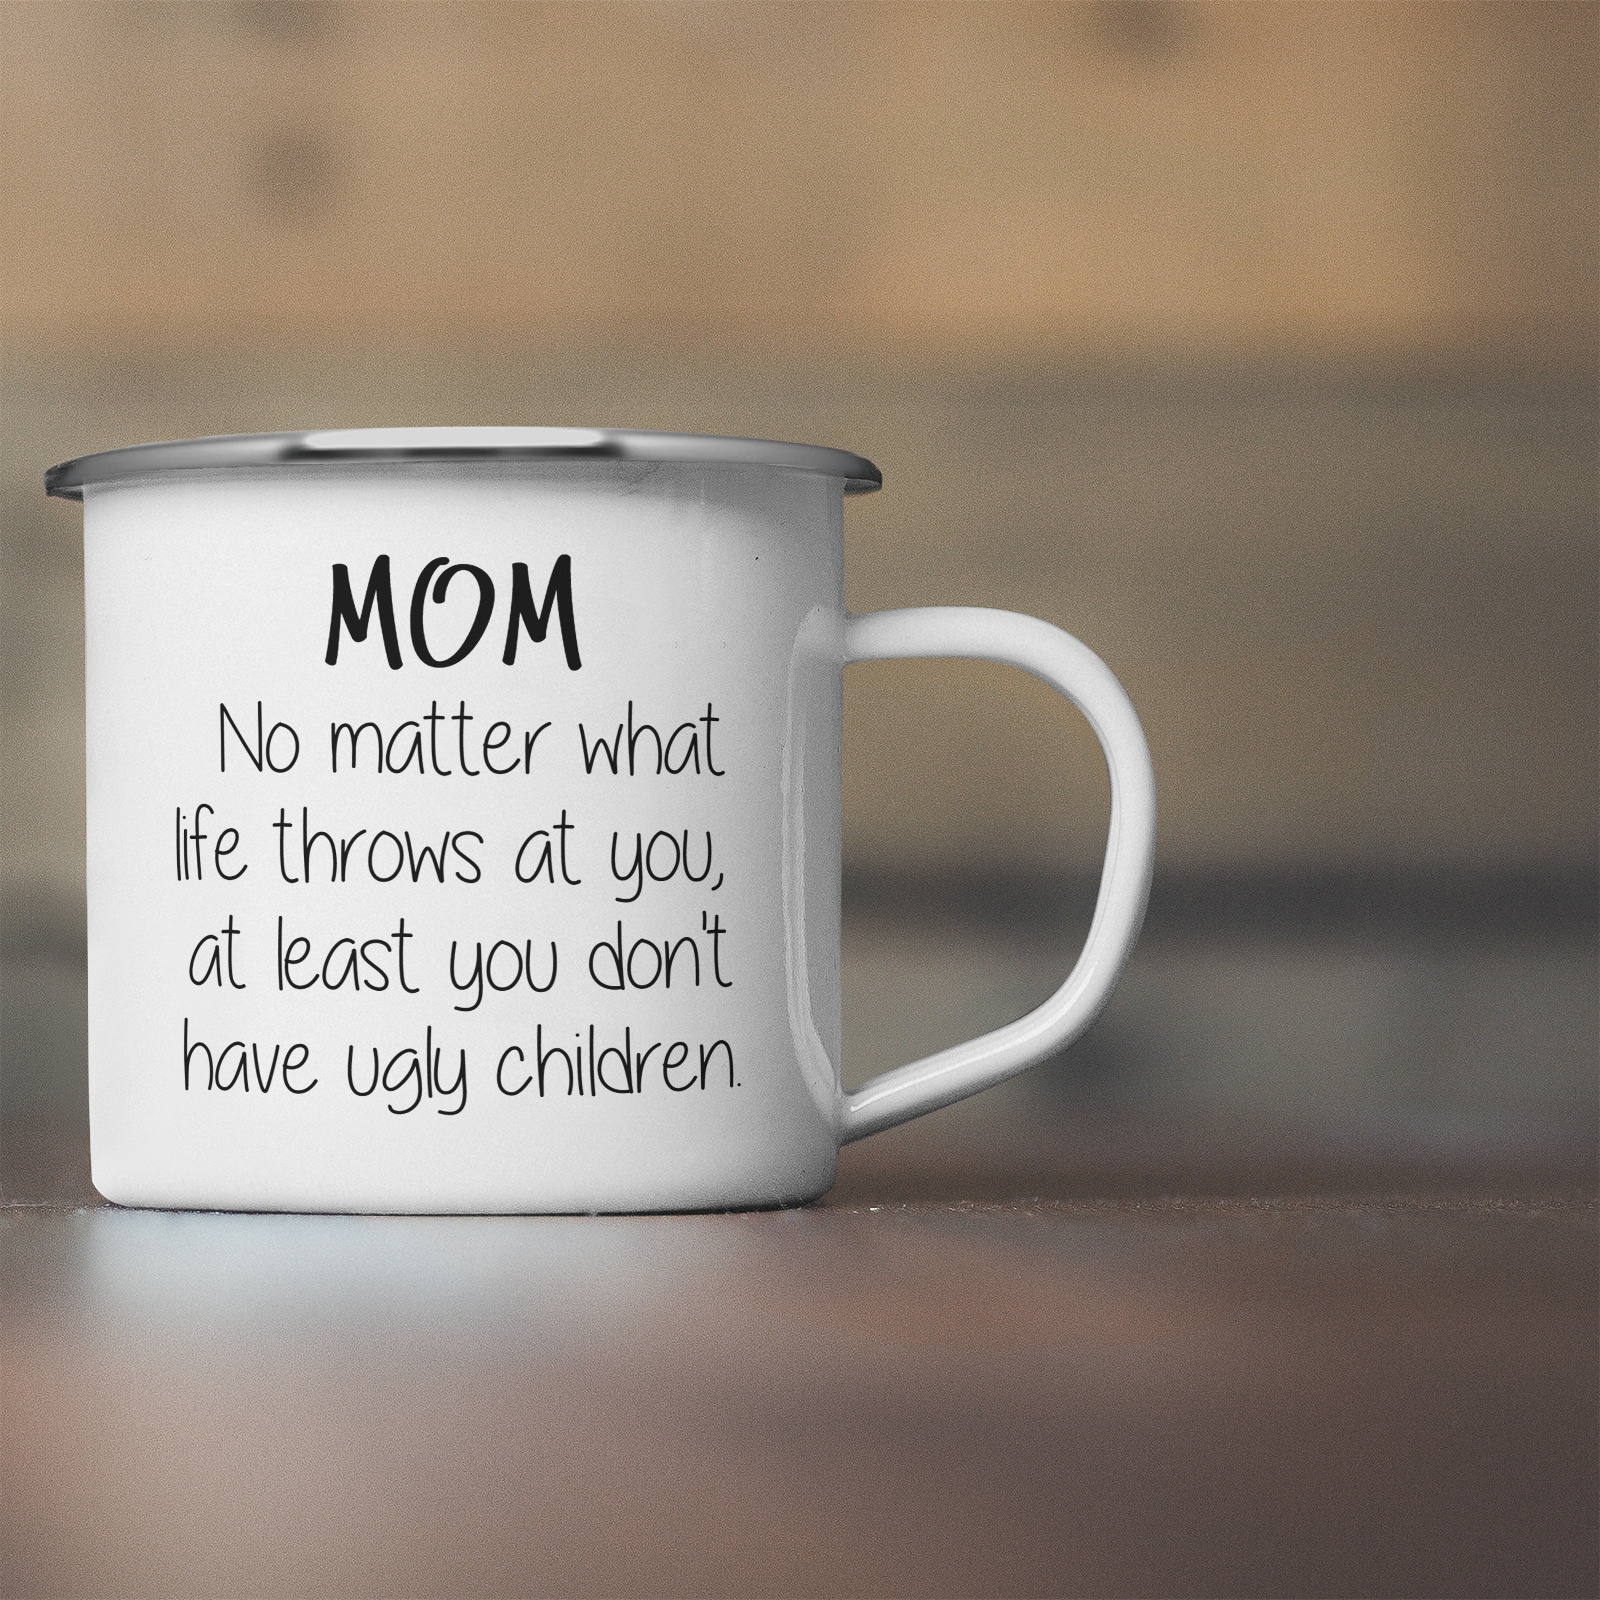 Mom Life Is Best Life Cool Mothers Day Gifts' Mug